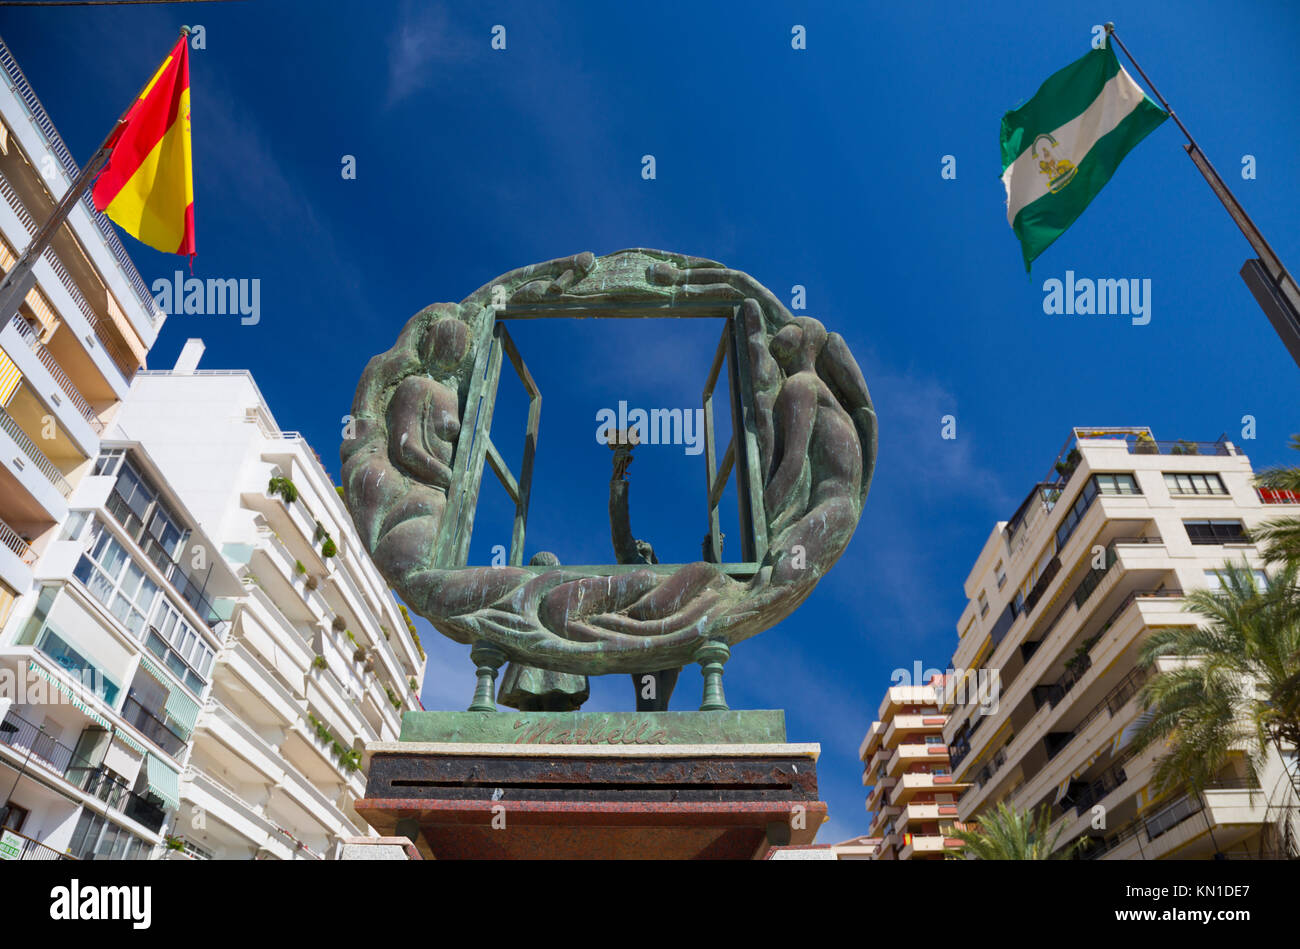 Sculpture in the Avenida del Mar, at the top of the steps leading down to the Paseo Maritimo, is an art piece by Eduardo Soriano. Marbella, Spain. Stock Photo